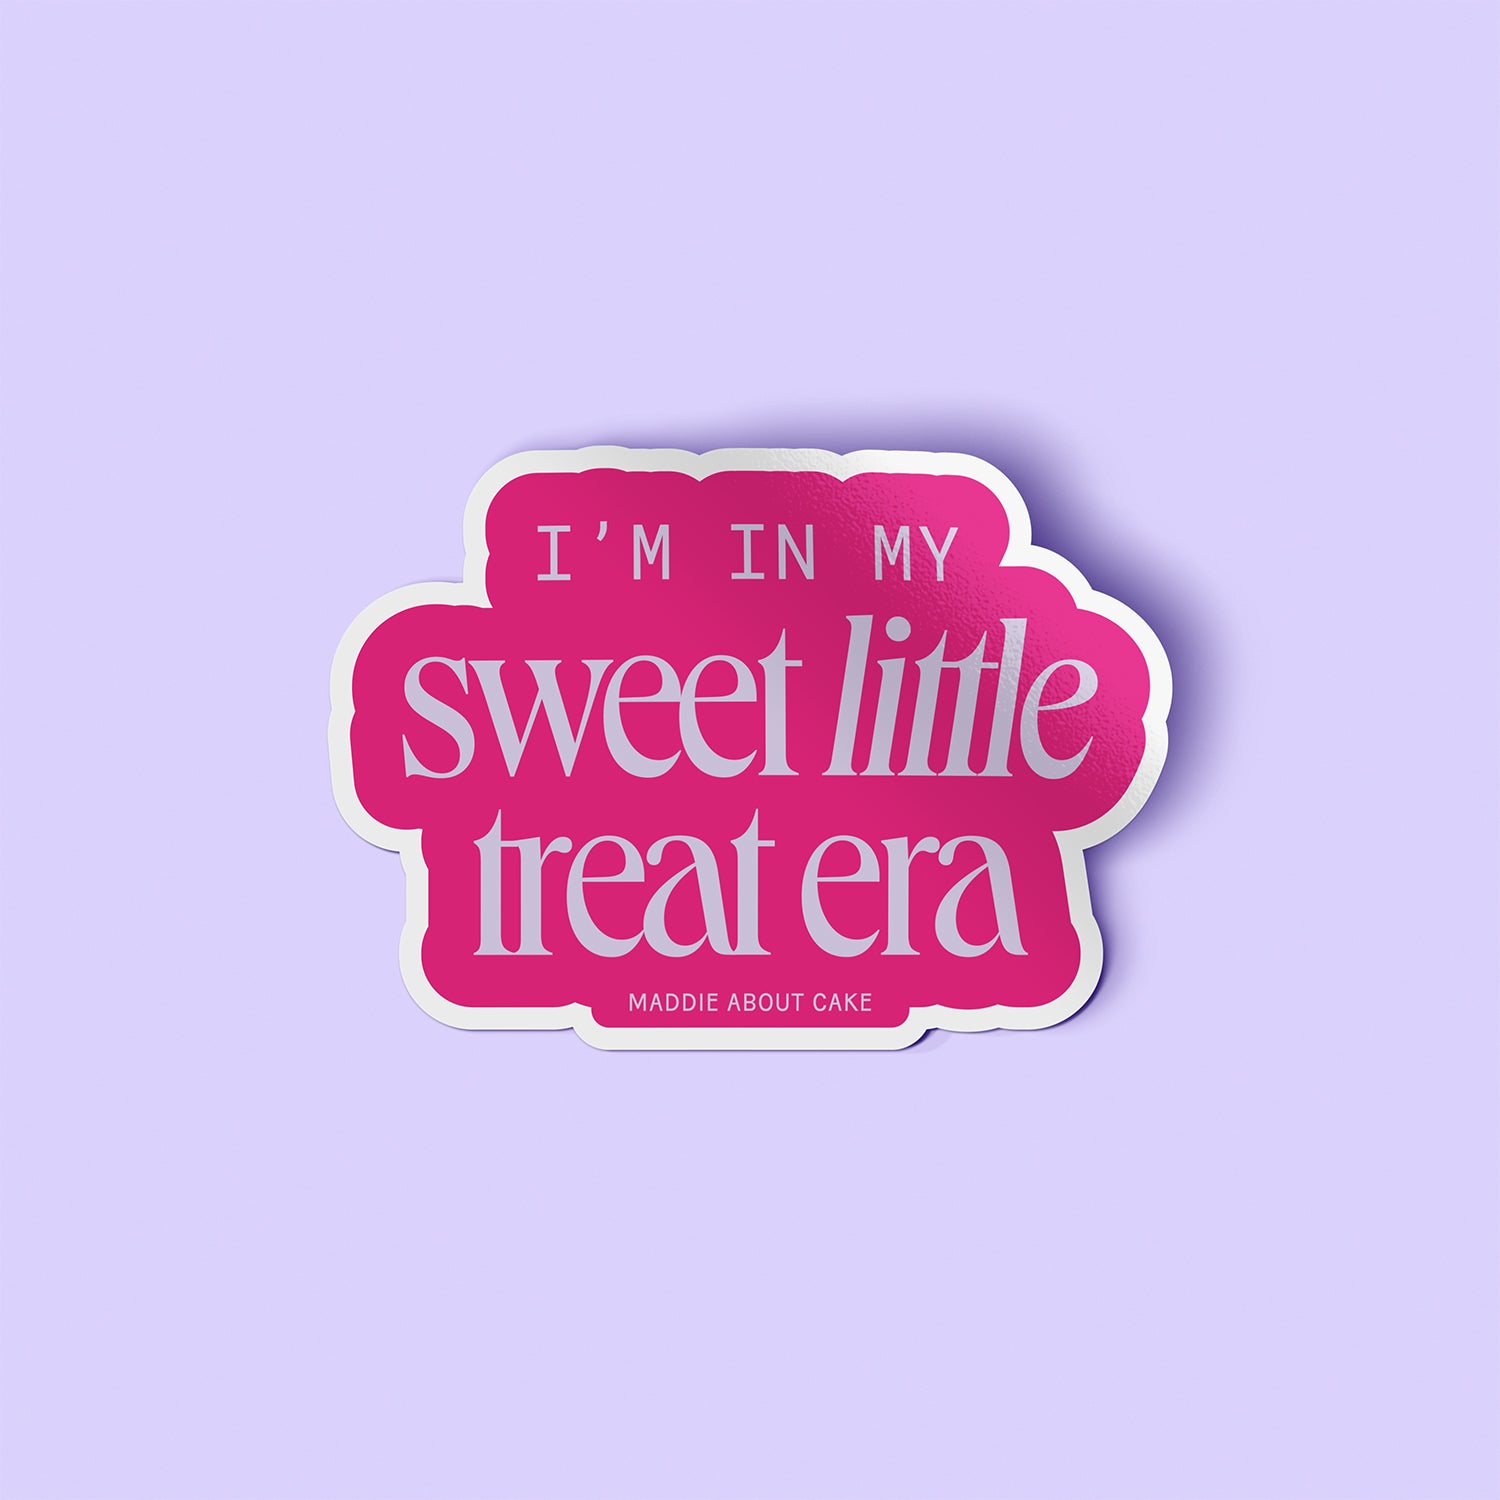 Decorative sticker that says "I'm in my sweet little treat era" in lilac text on a hot pink background. The sticker is laying on a lilac background. 